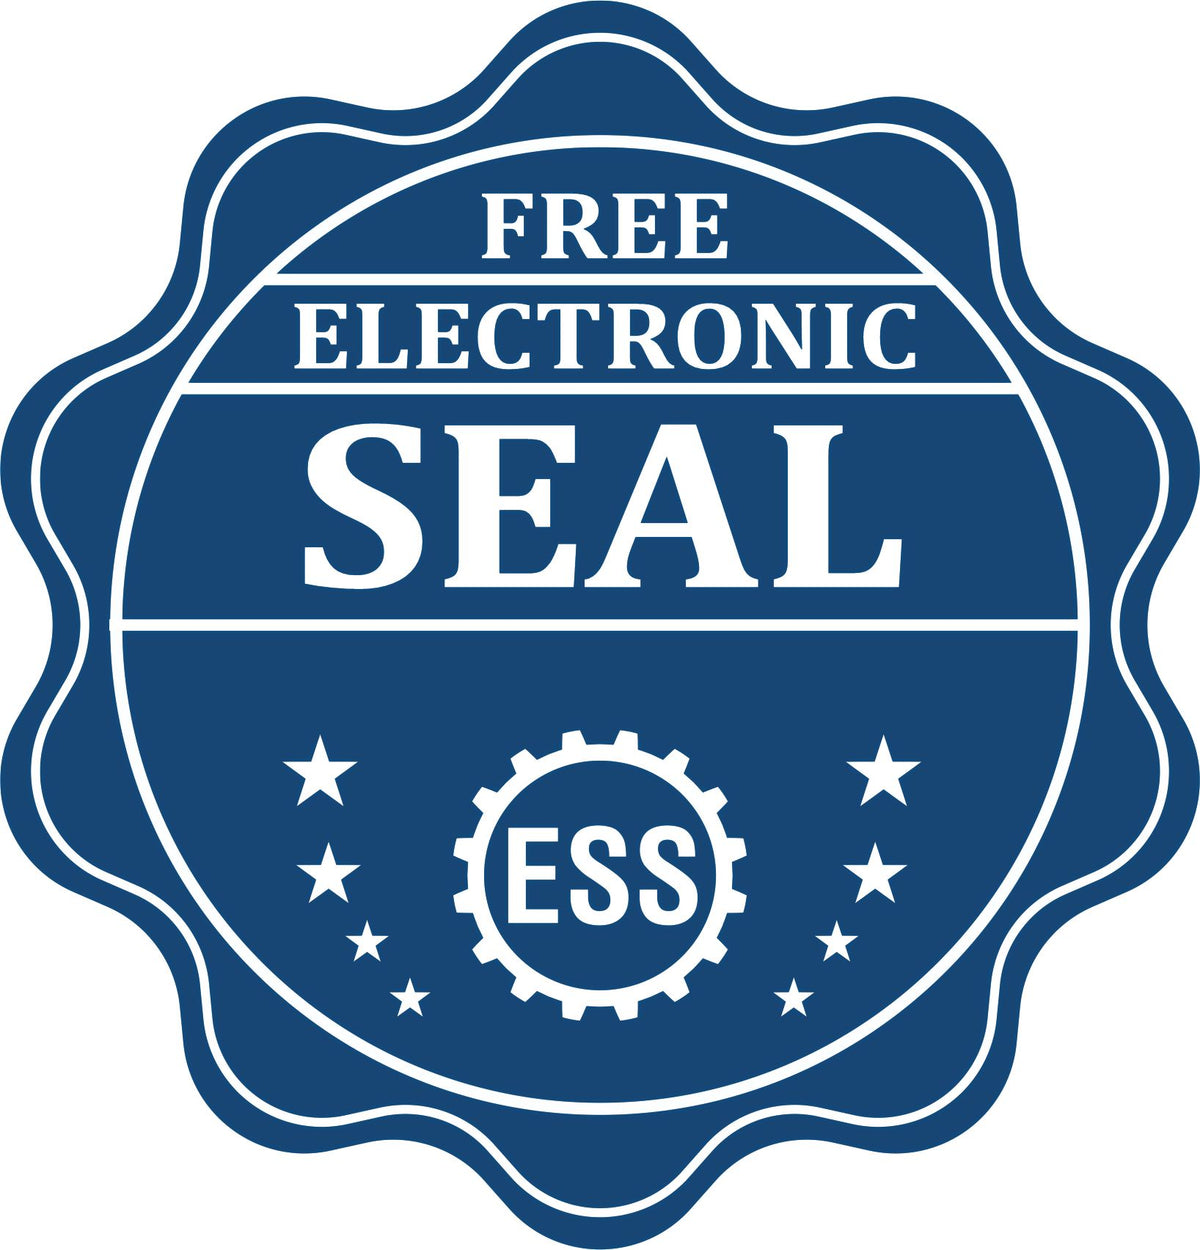 A badge showing a free electronic seal for the Premium MaxLight Pre-Inked Alaska Engineering Stamp with stars and the ESS gear on the emblem.